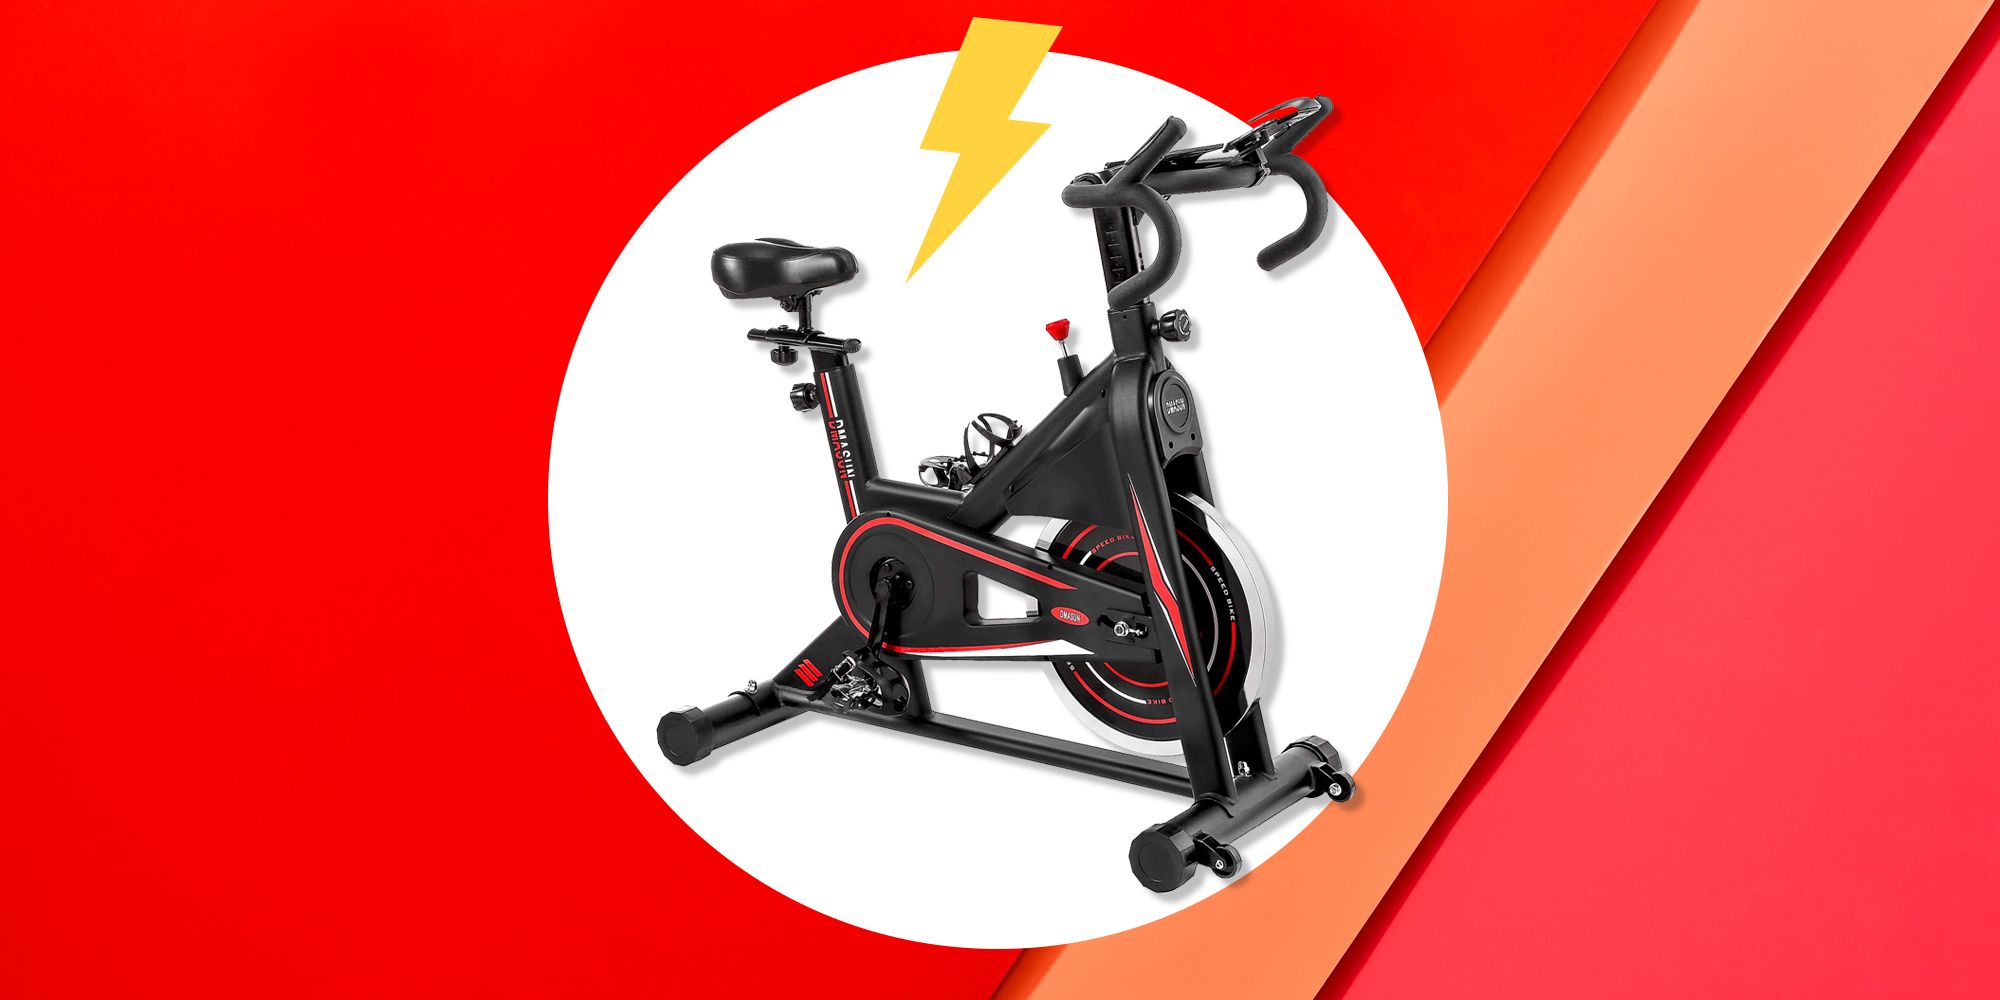 Bicycle Cycling Fitness Gym Exercise Stationary Bike Cardio Workout Home Indoor 